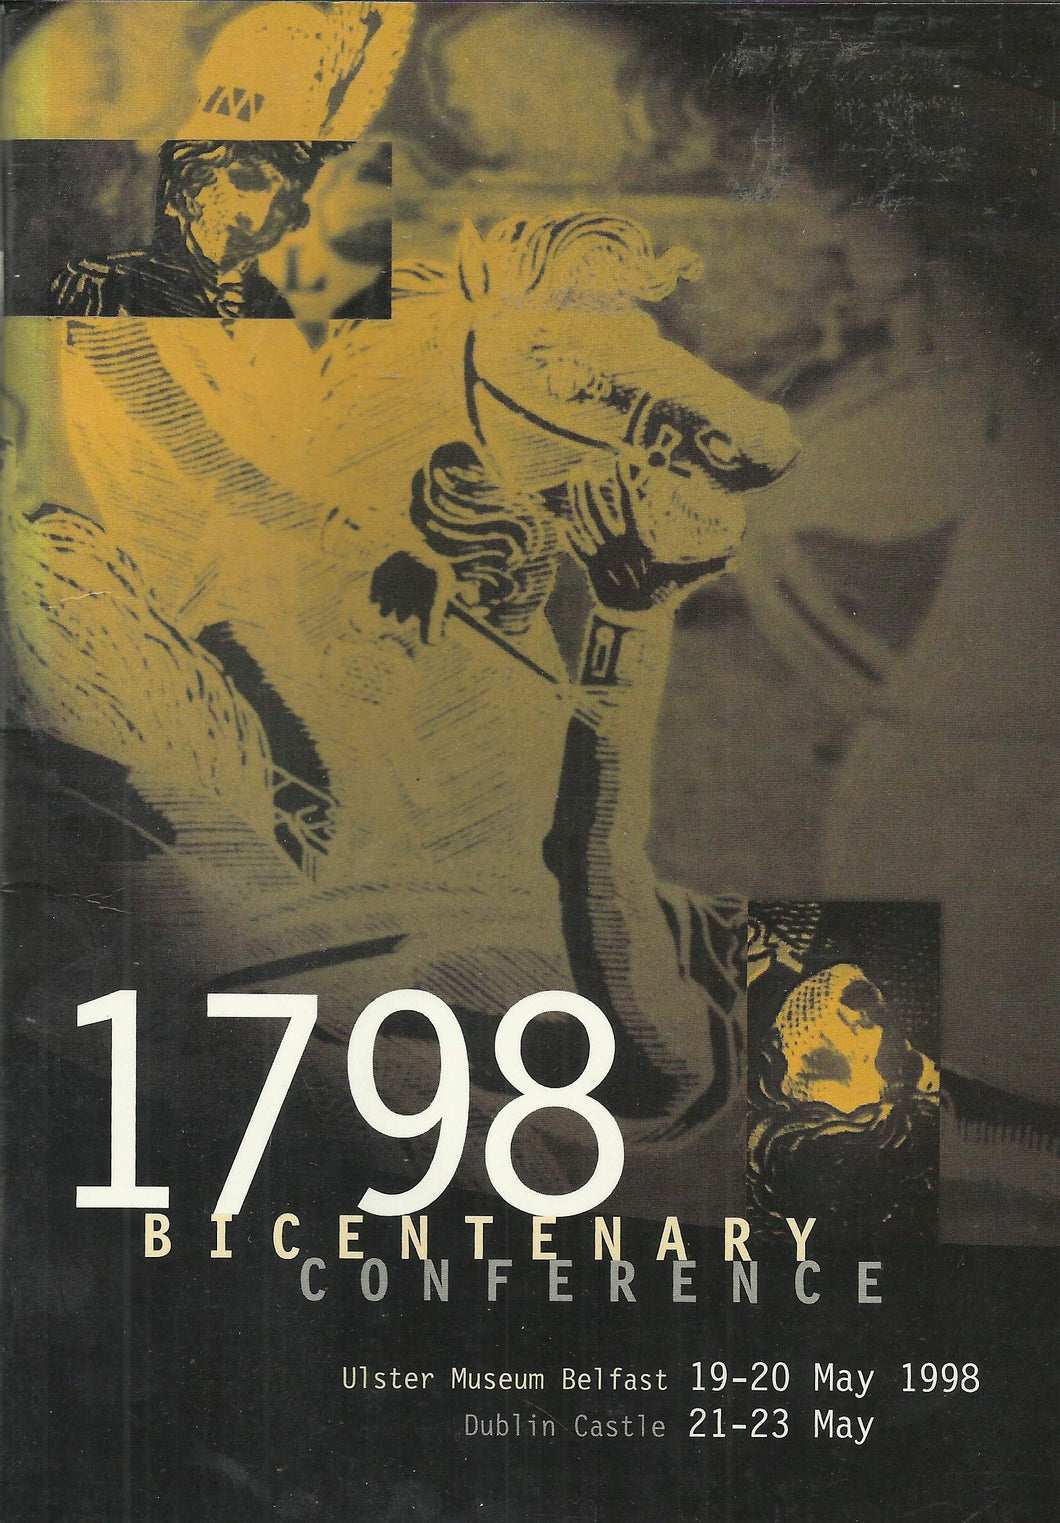 1798 Bicentenary Conference - Ulster Museum, Belfast, 19-20 May 1998; Dublin Castle, 21-23 May